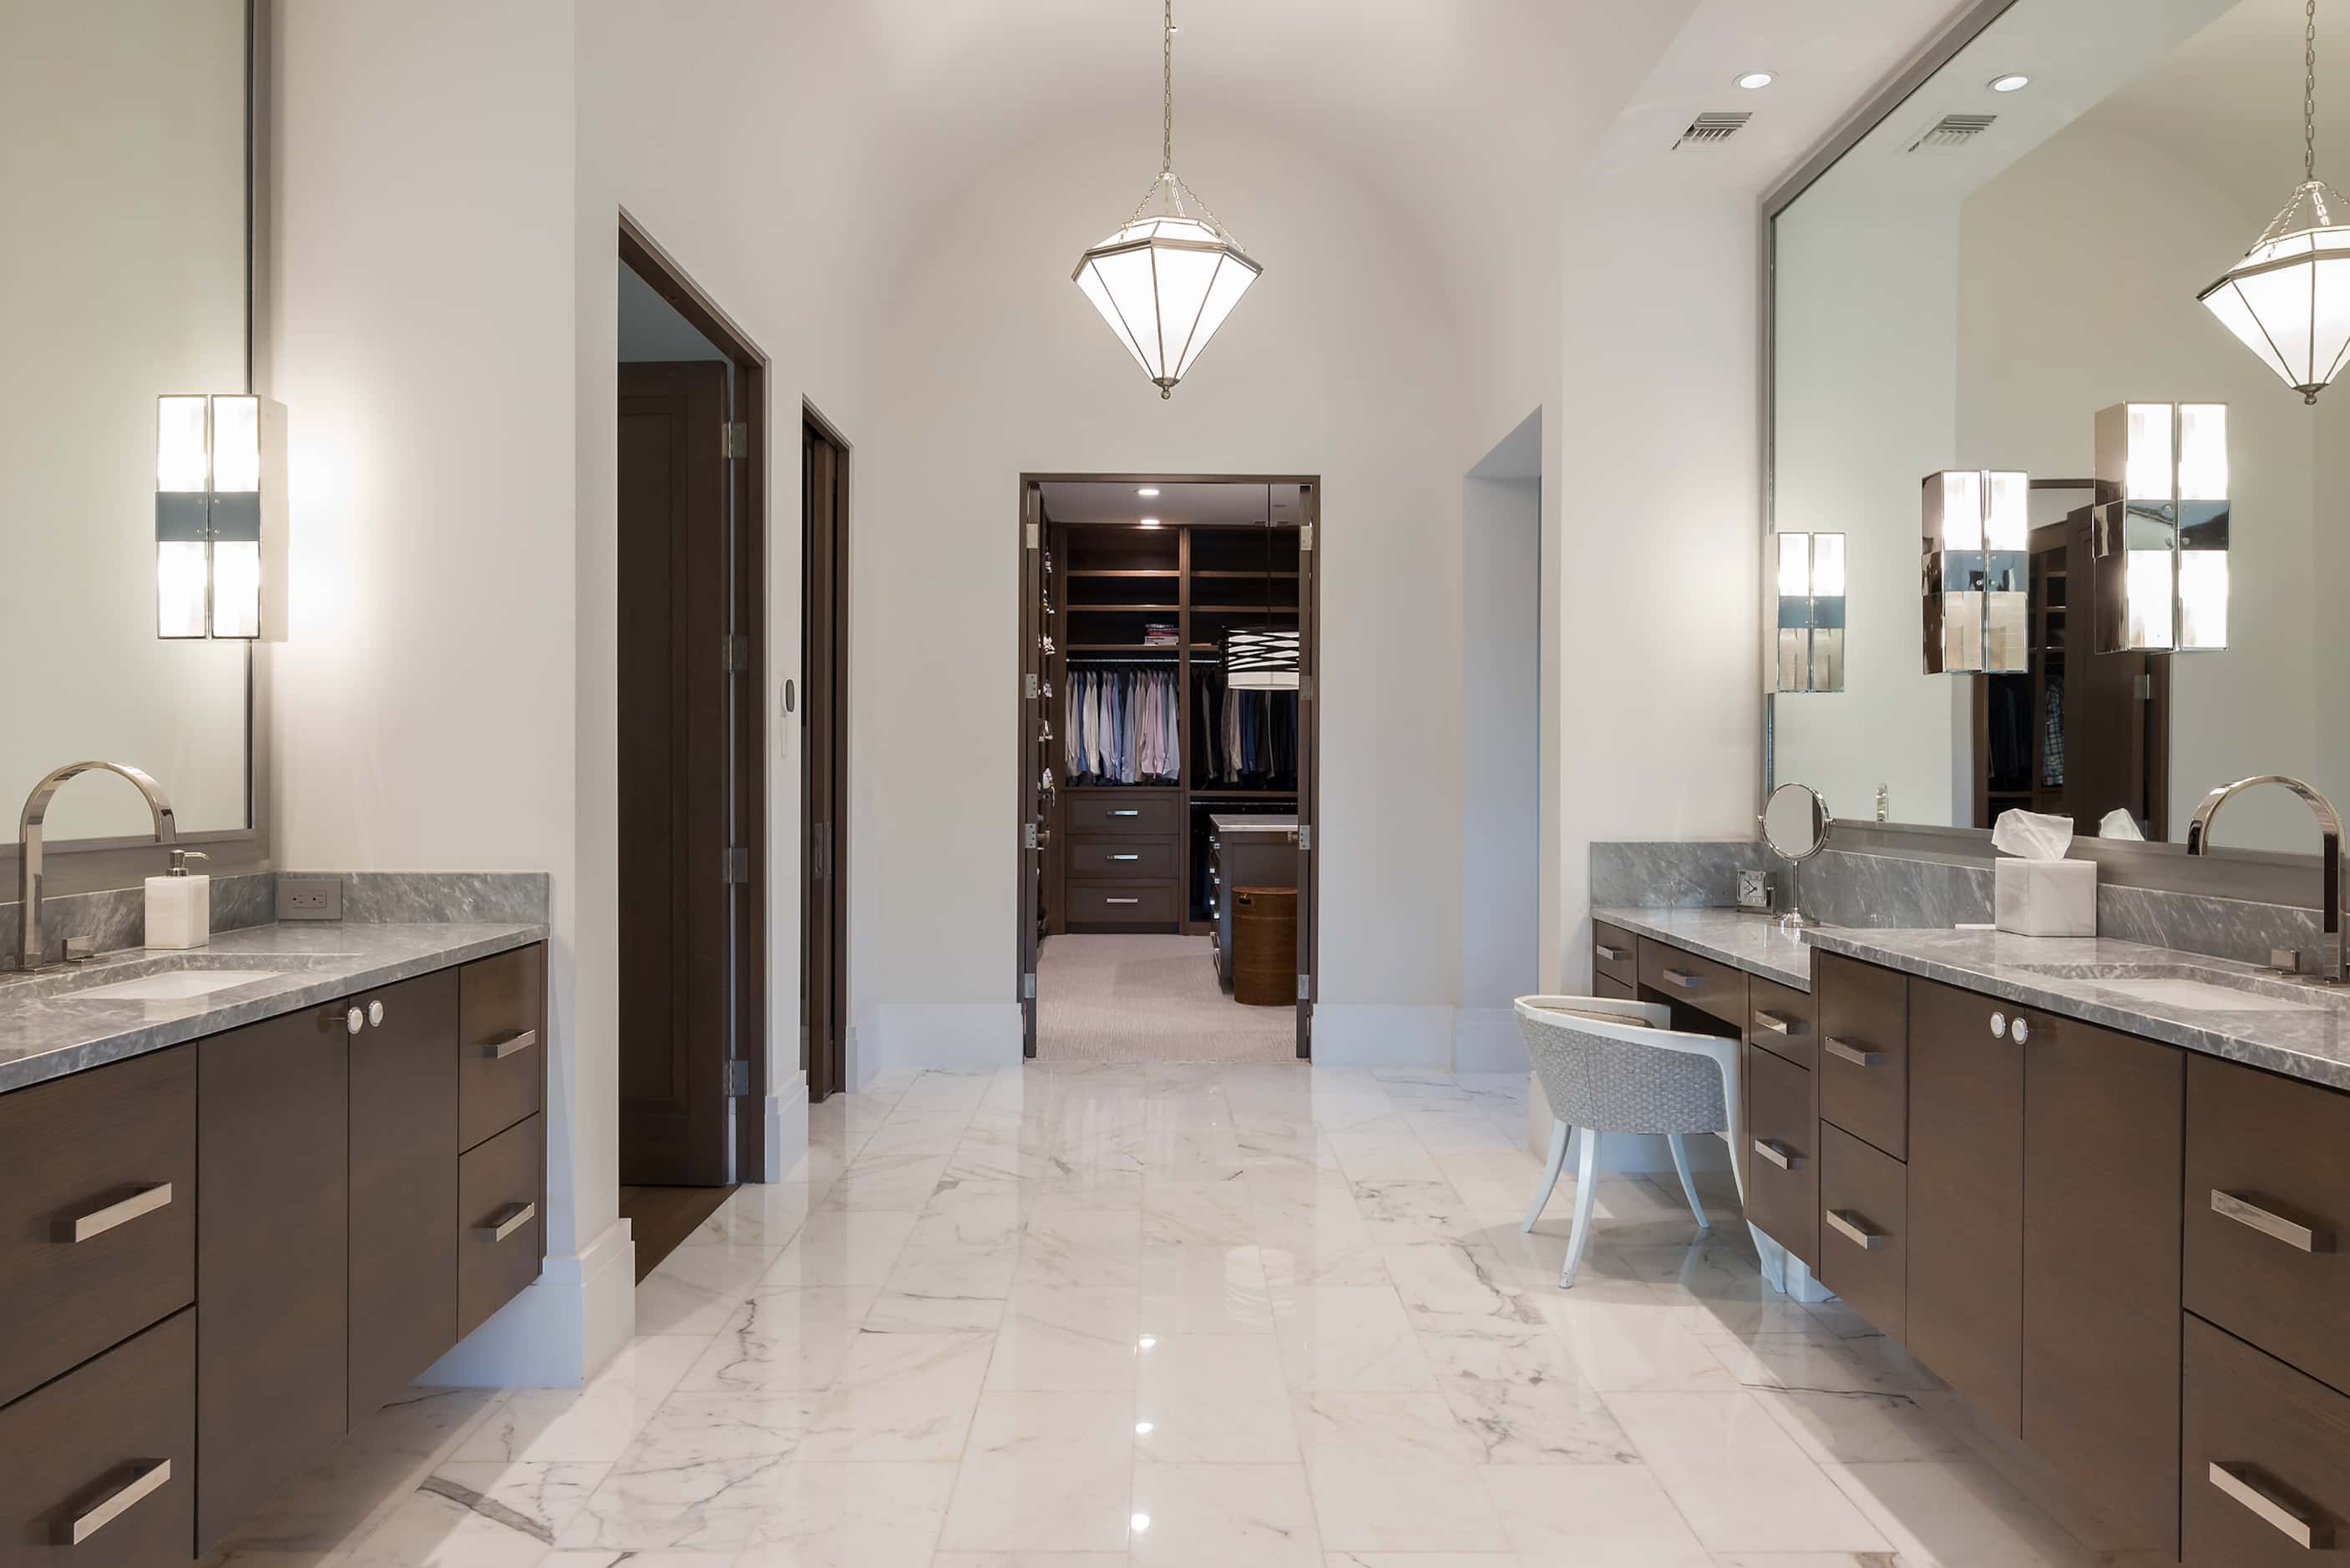 The bathroom off of the primary suite offers two walk-in closets.